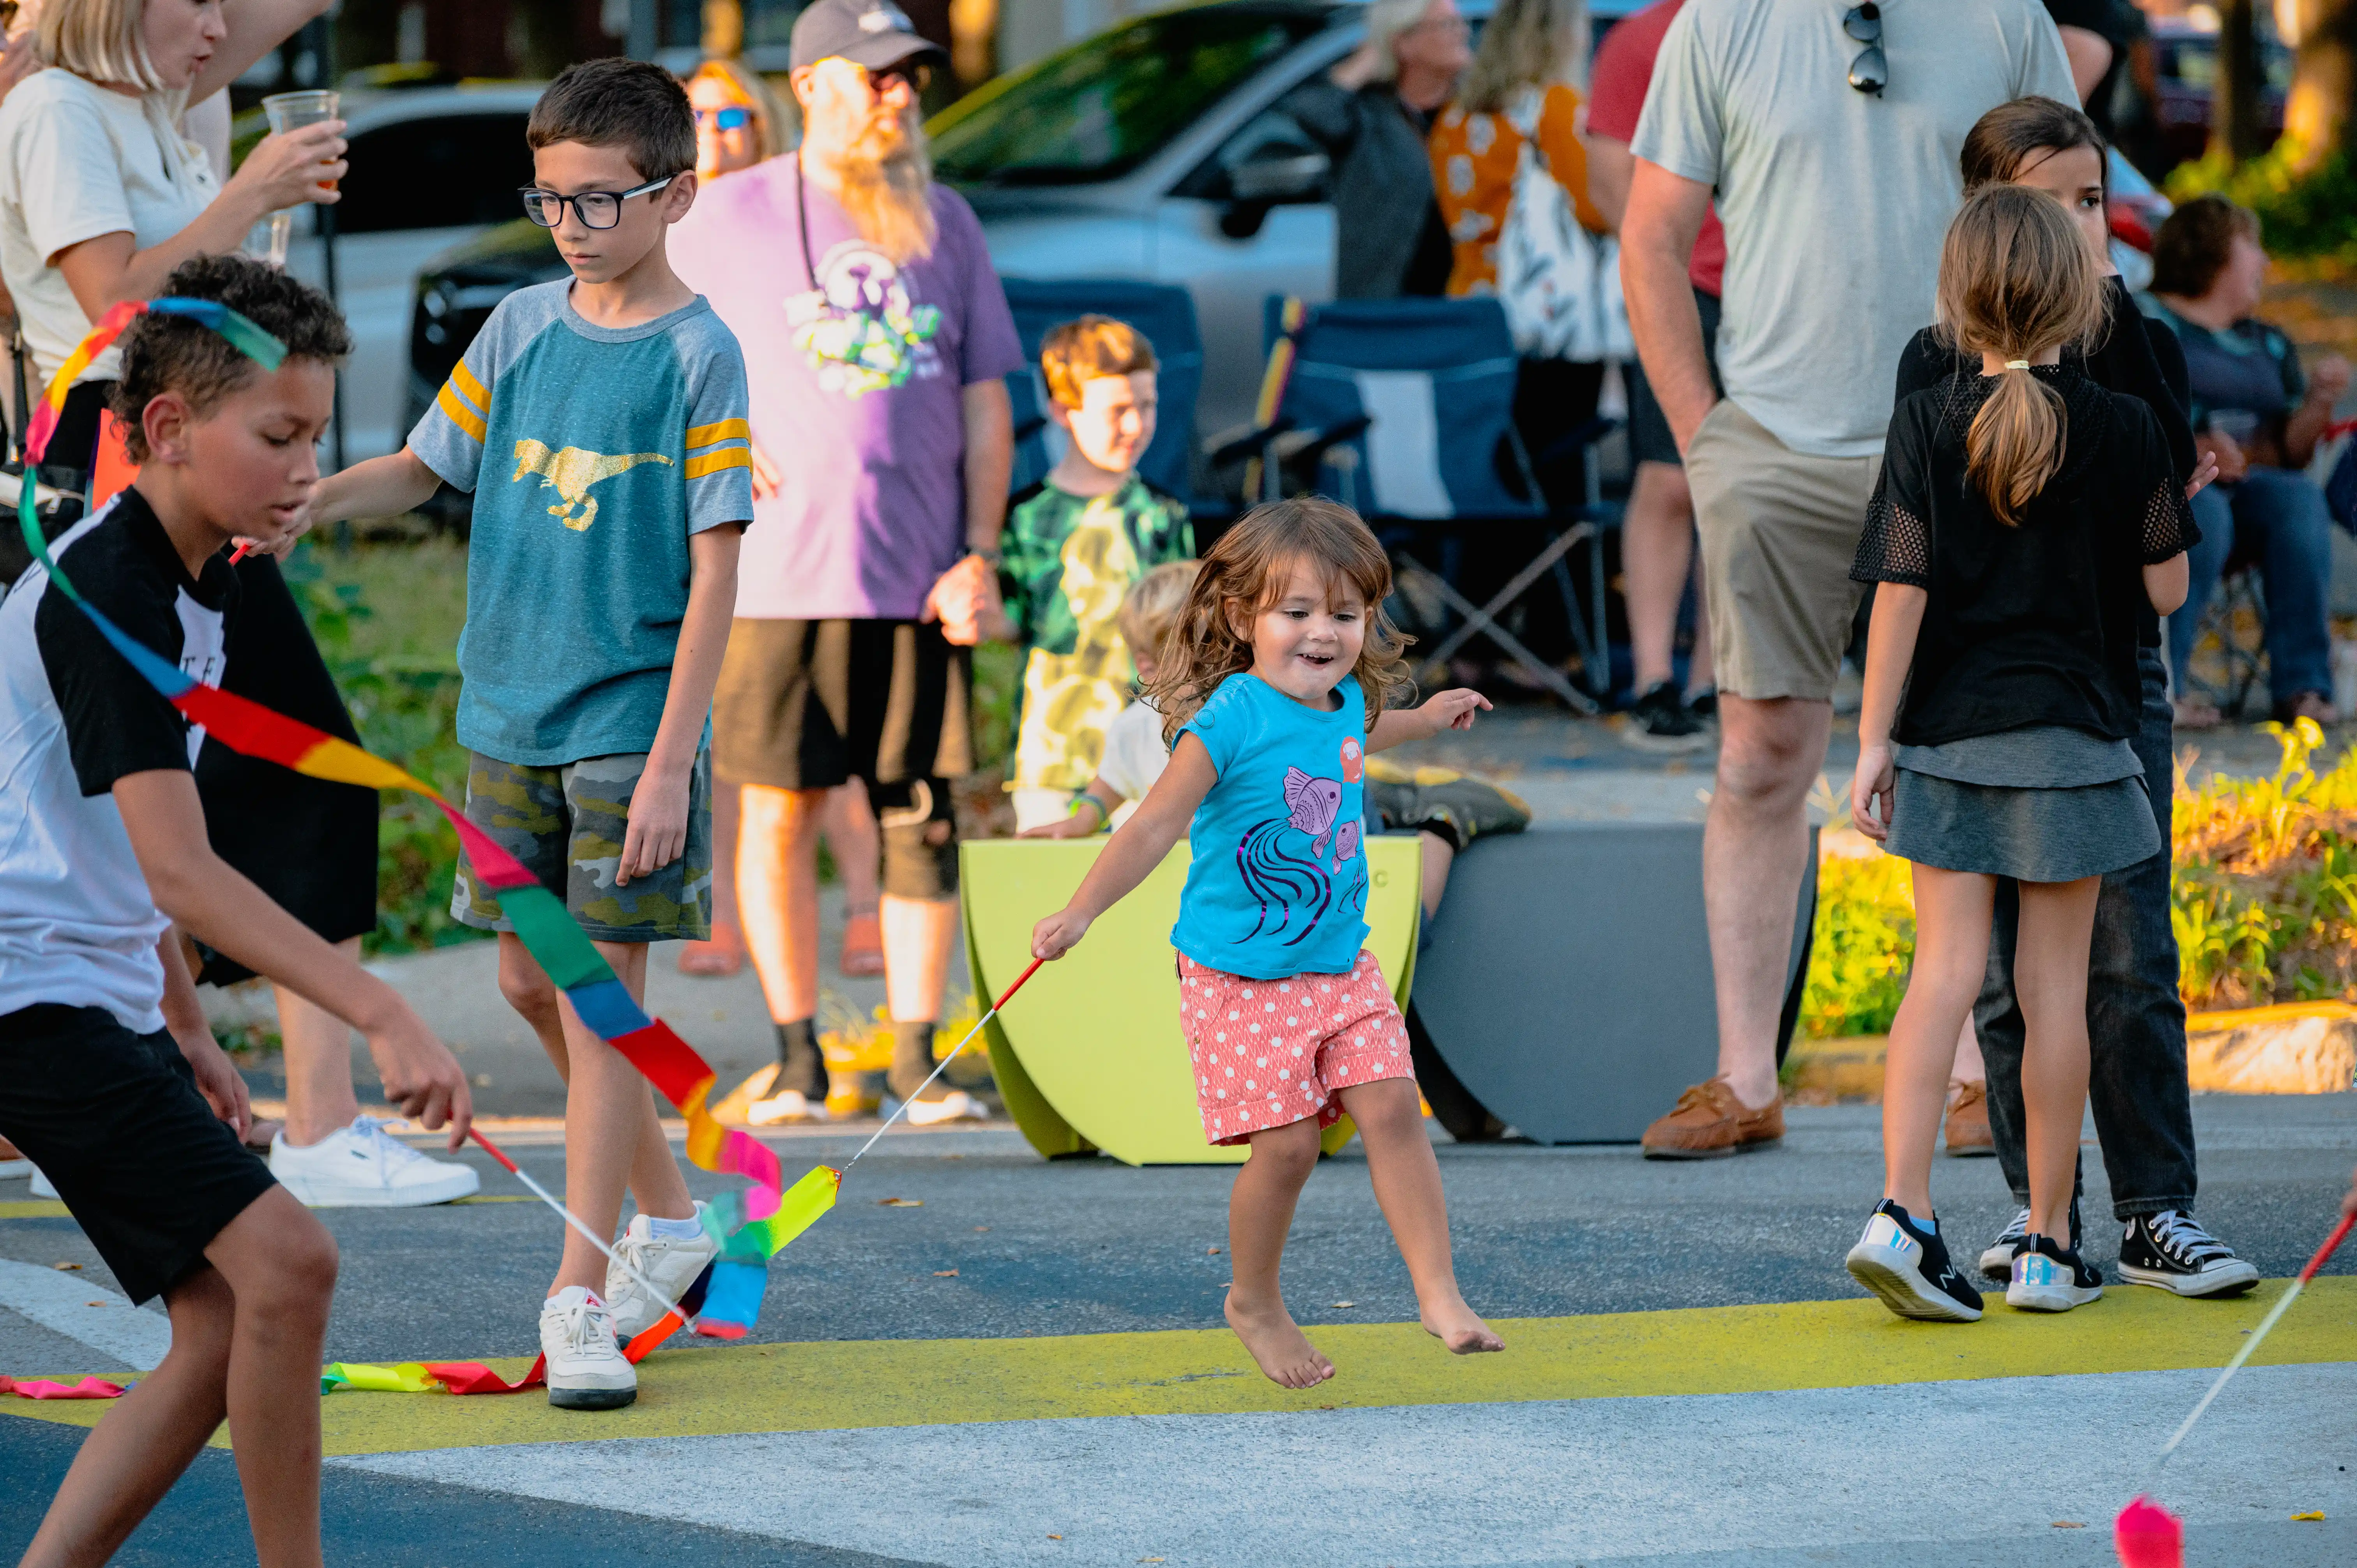 Children playing with jump ropes on a closed street during a community event while adults watch.